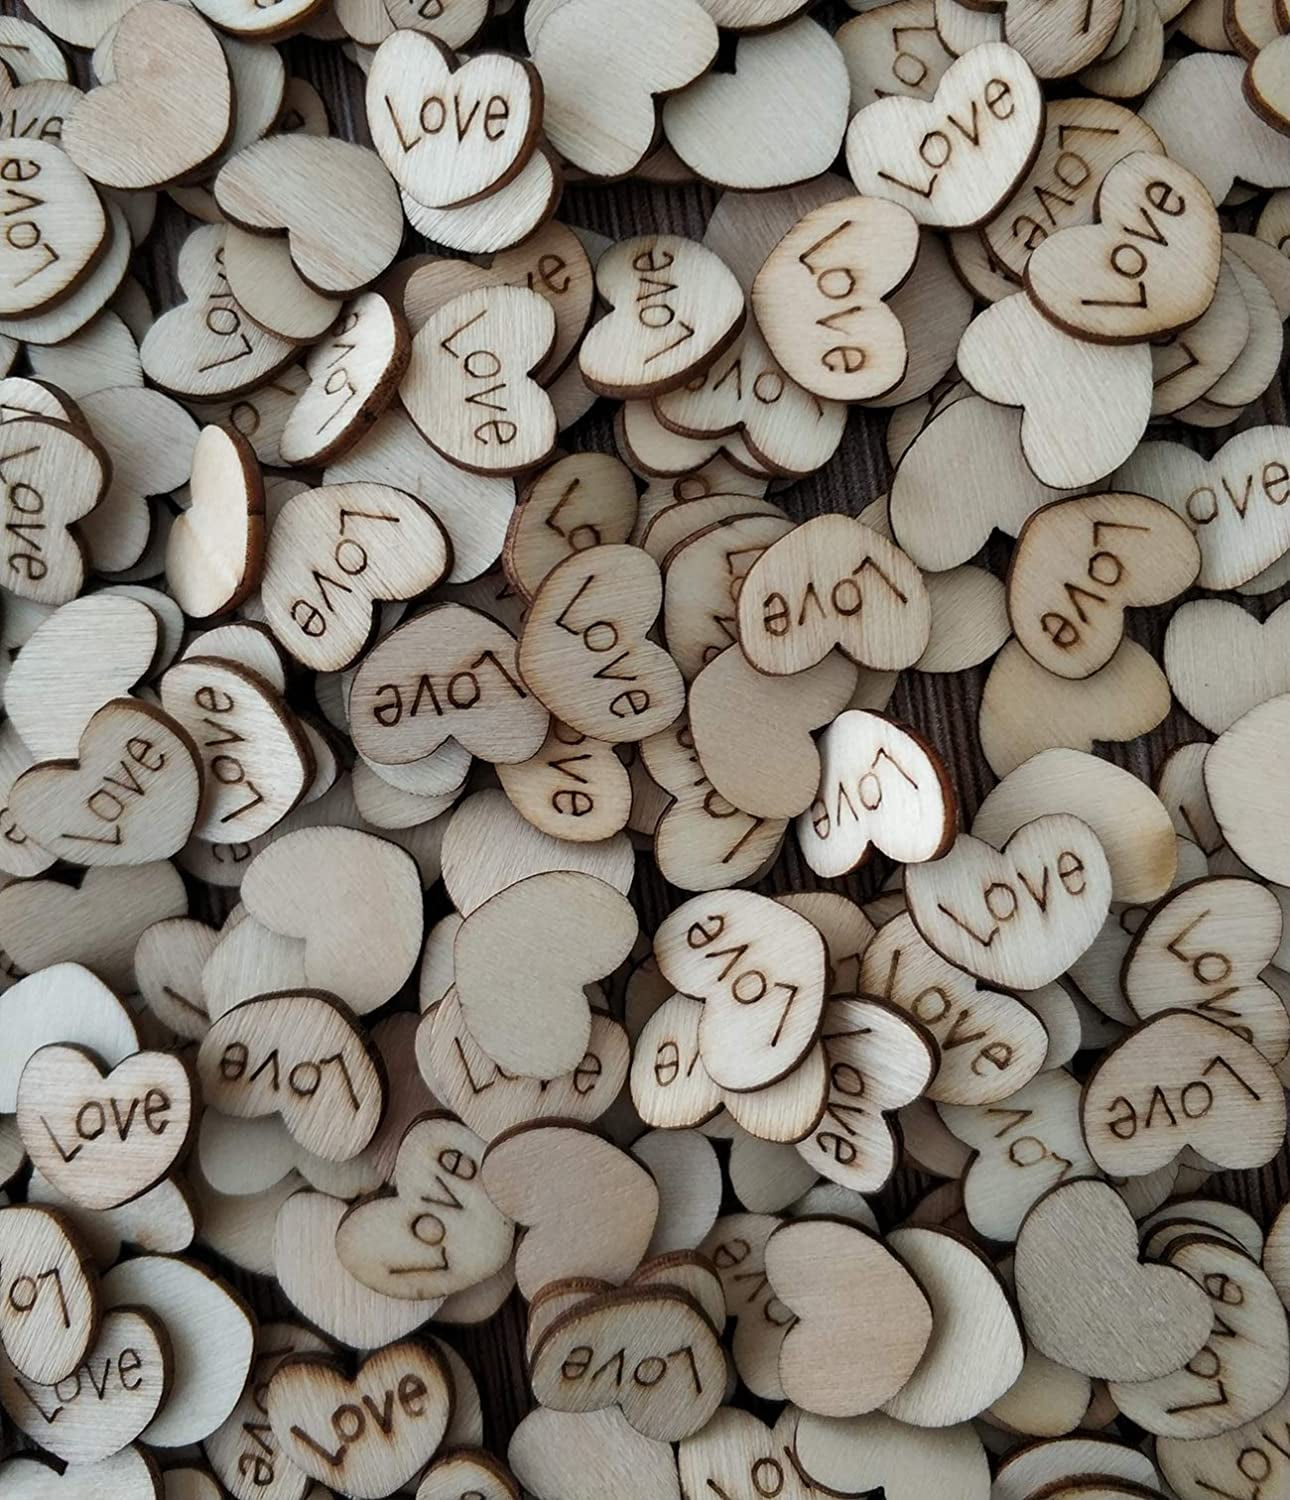 100PCSRustic Wooden Love Heart Wedding Table Scatter Decoration Crafts DIY 